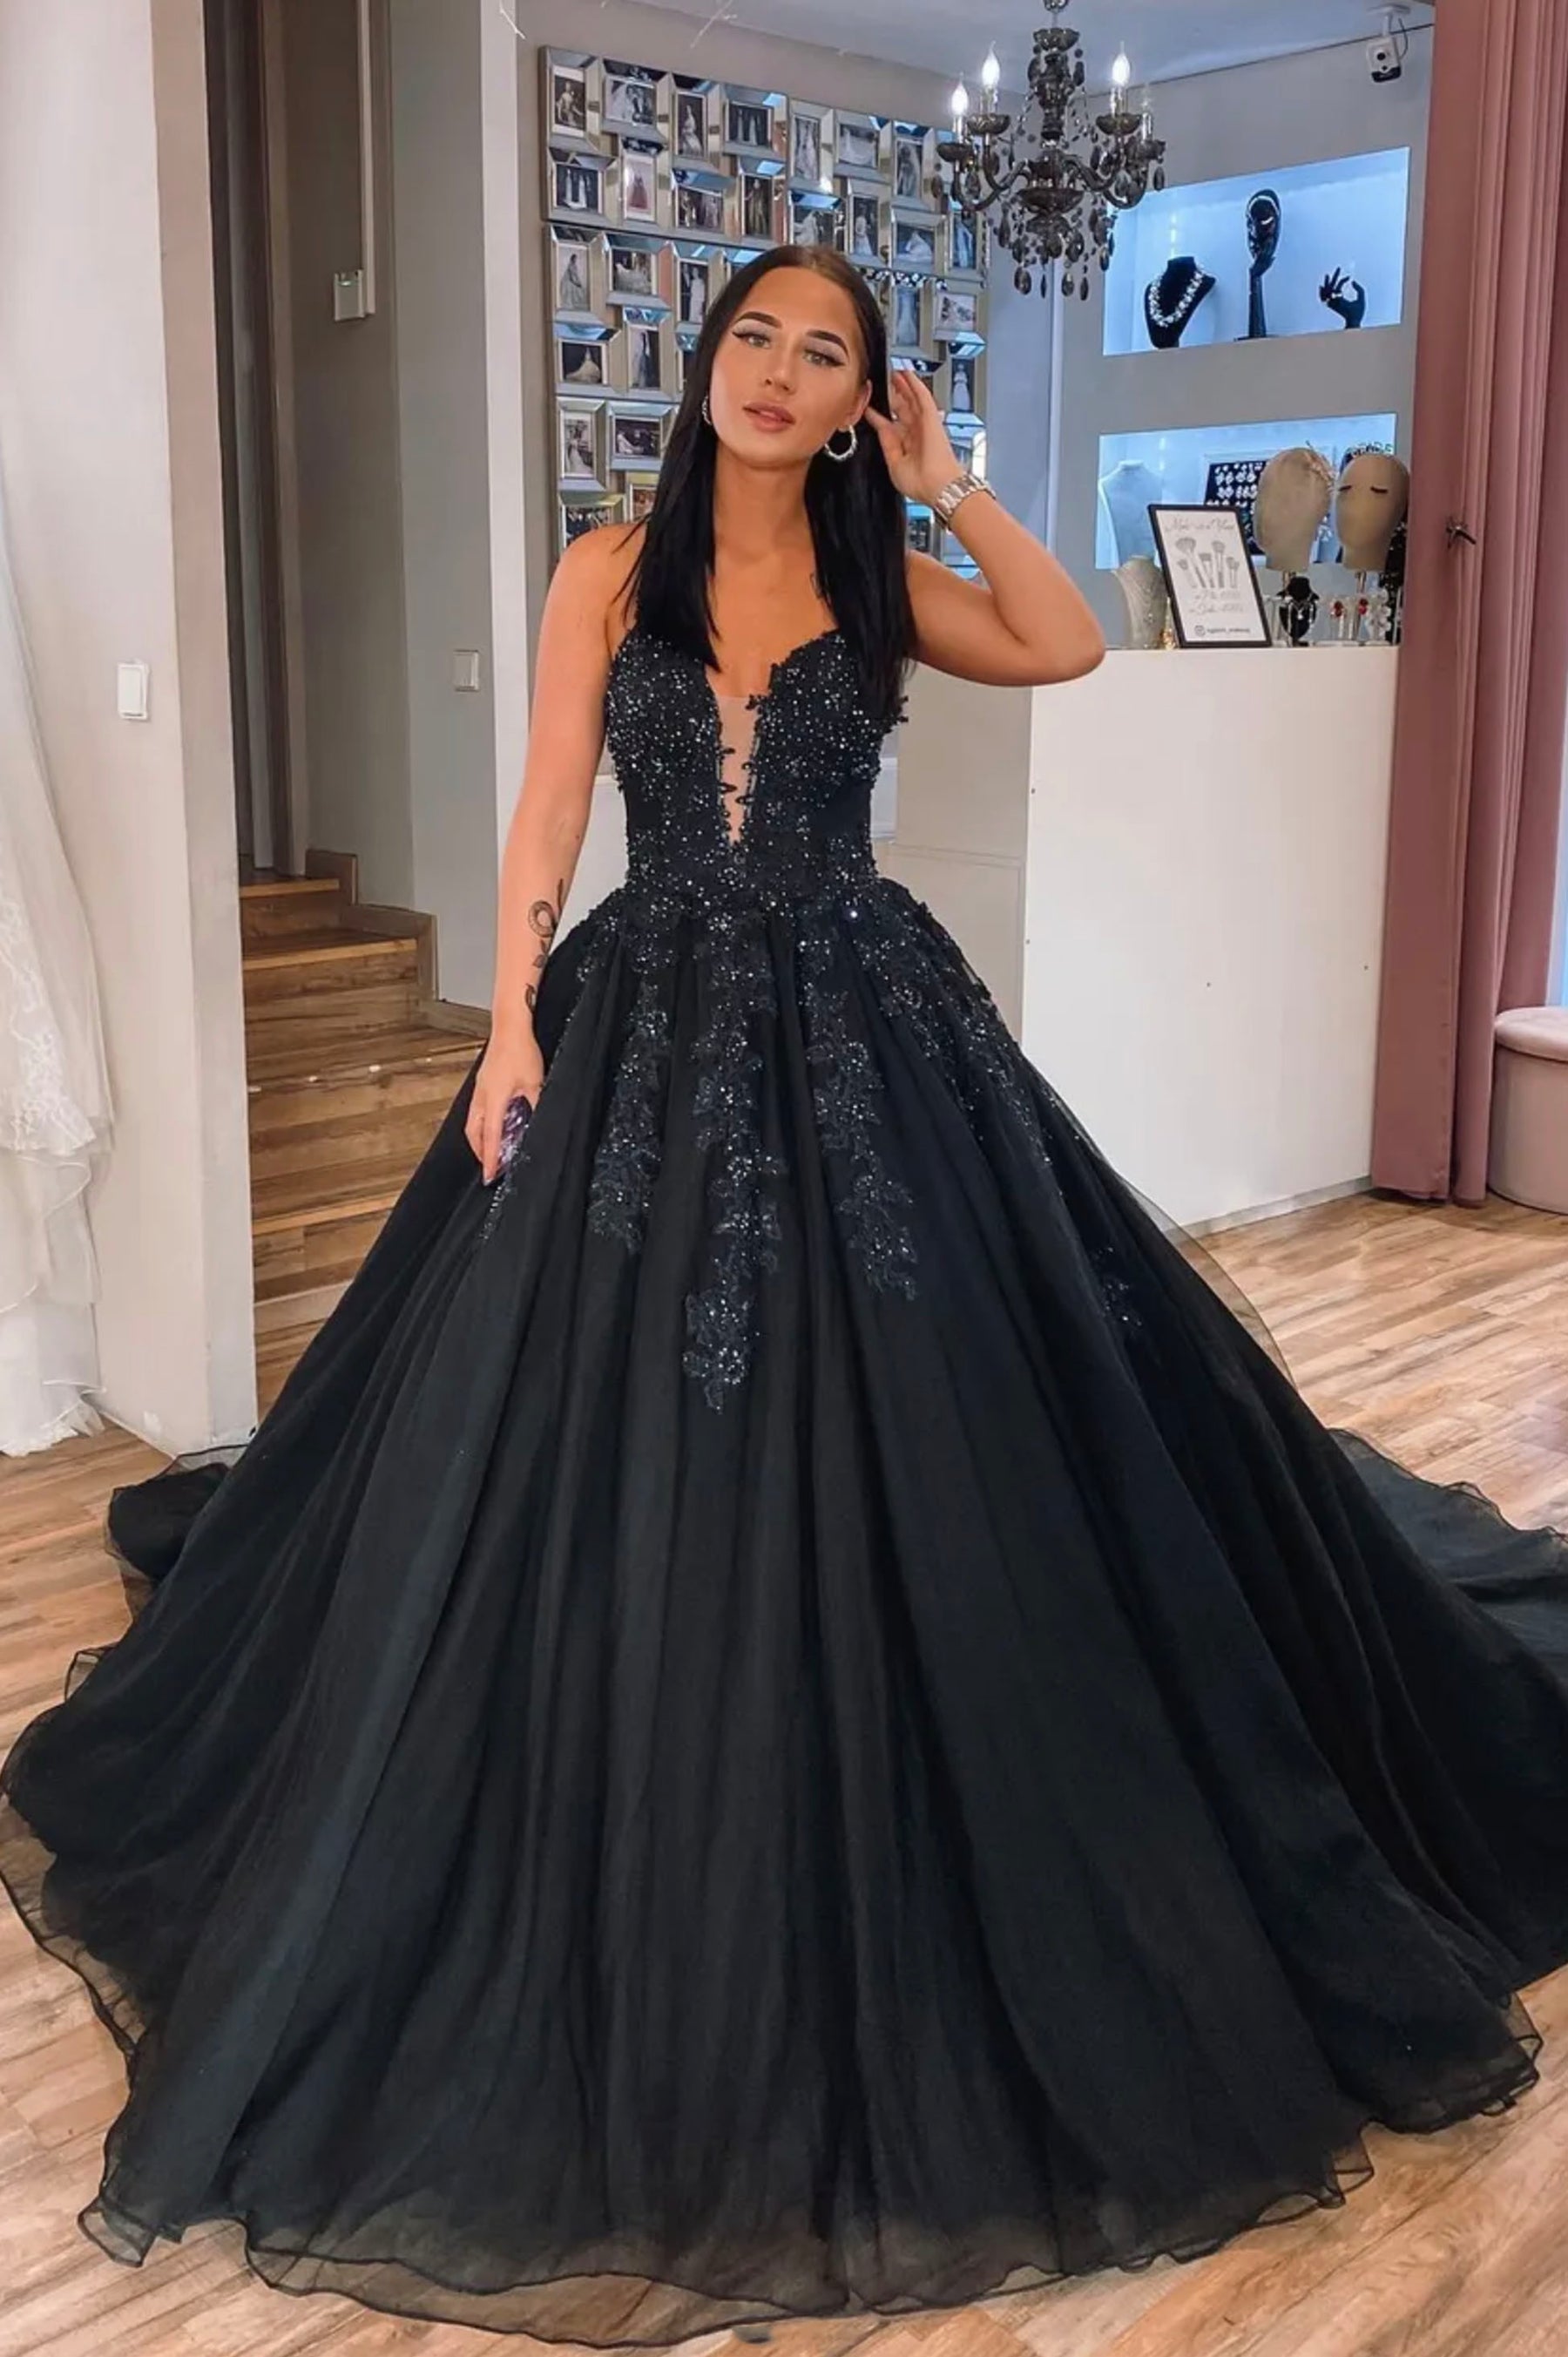 PSY683,High Quality Ball Gown Black Prom Dresses,2022 Quinceanera Dresses,Sparkly  Prom Dresses · Prom Fantasy · Online Store Powered by Storenvy